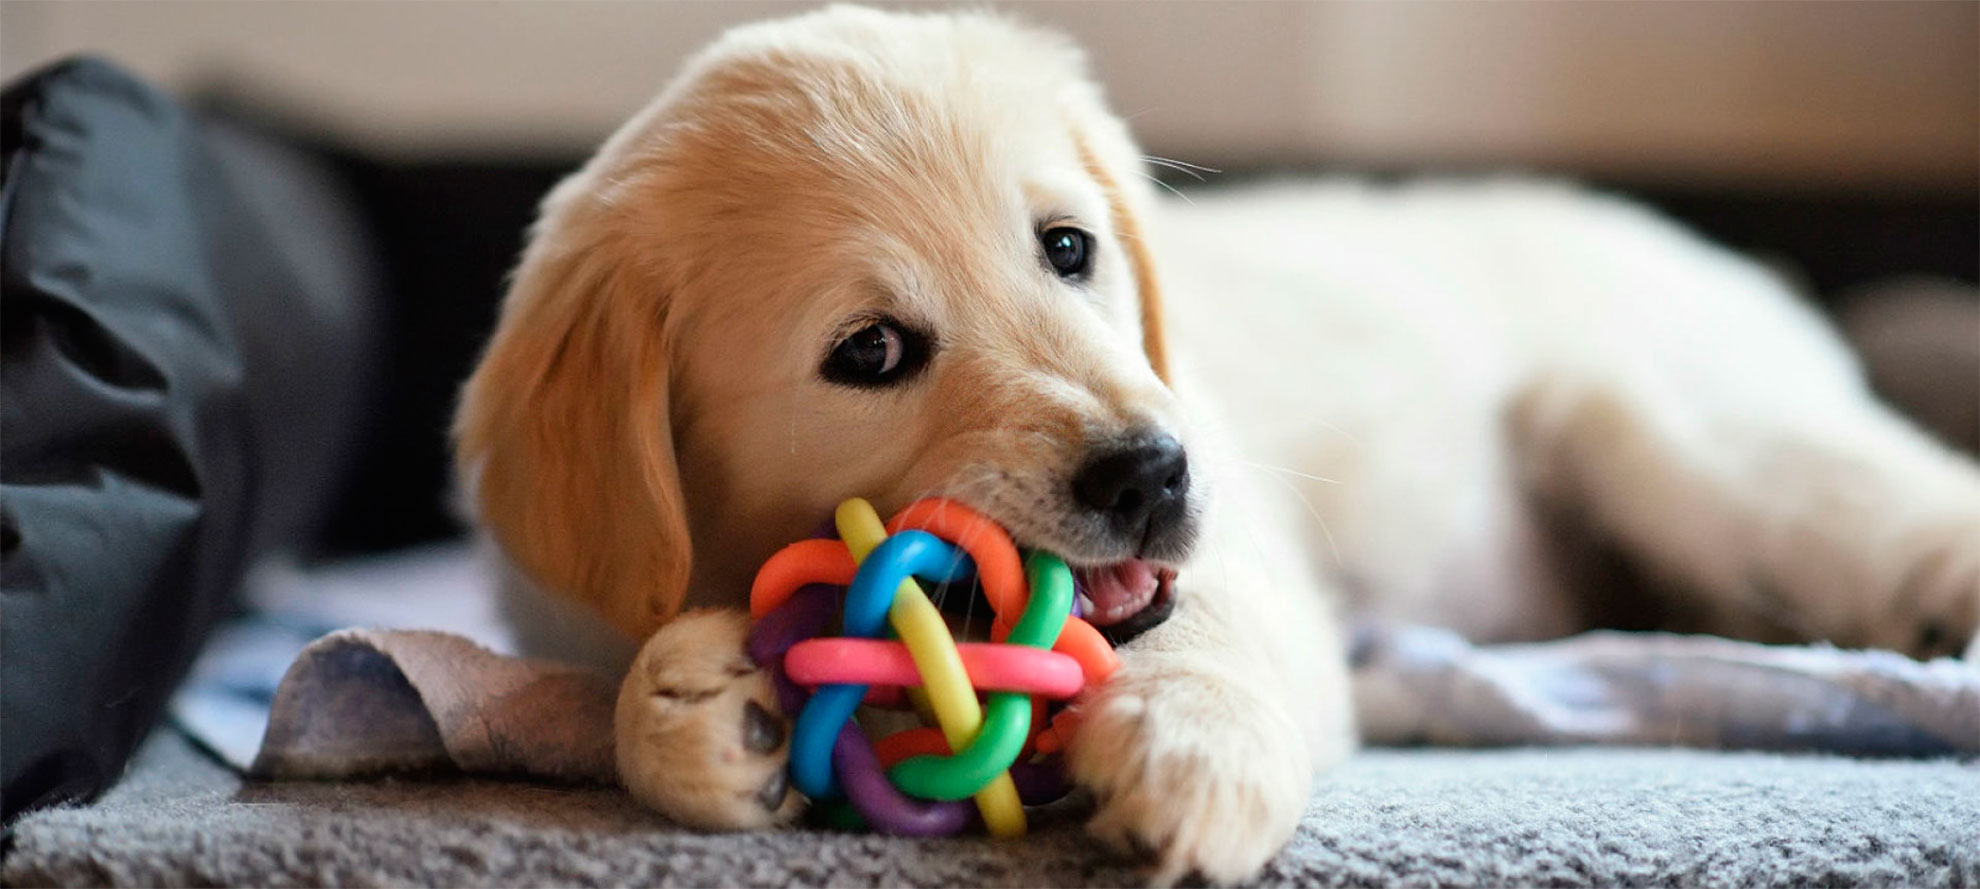 Dog with interactive toy.